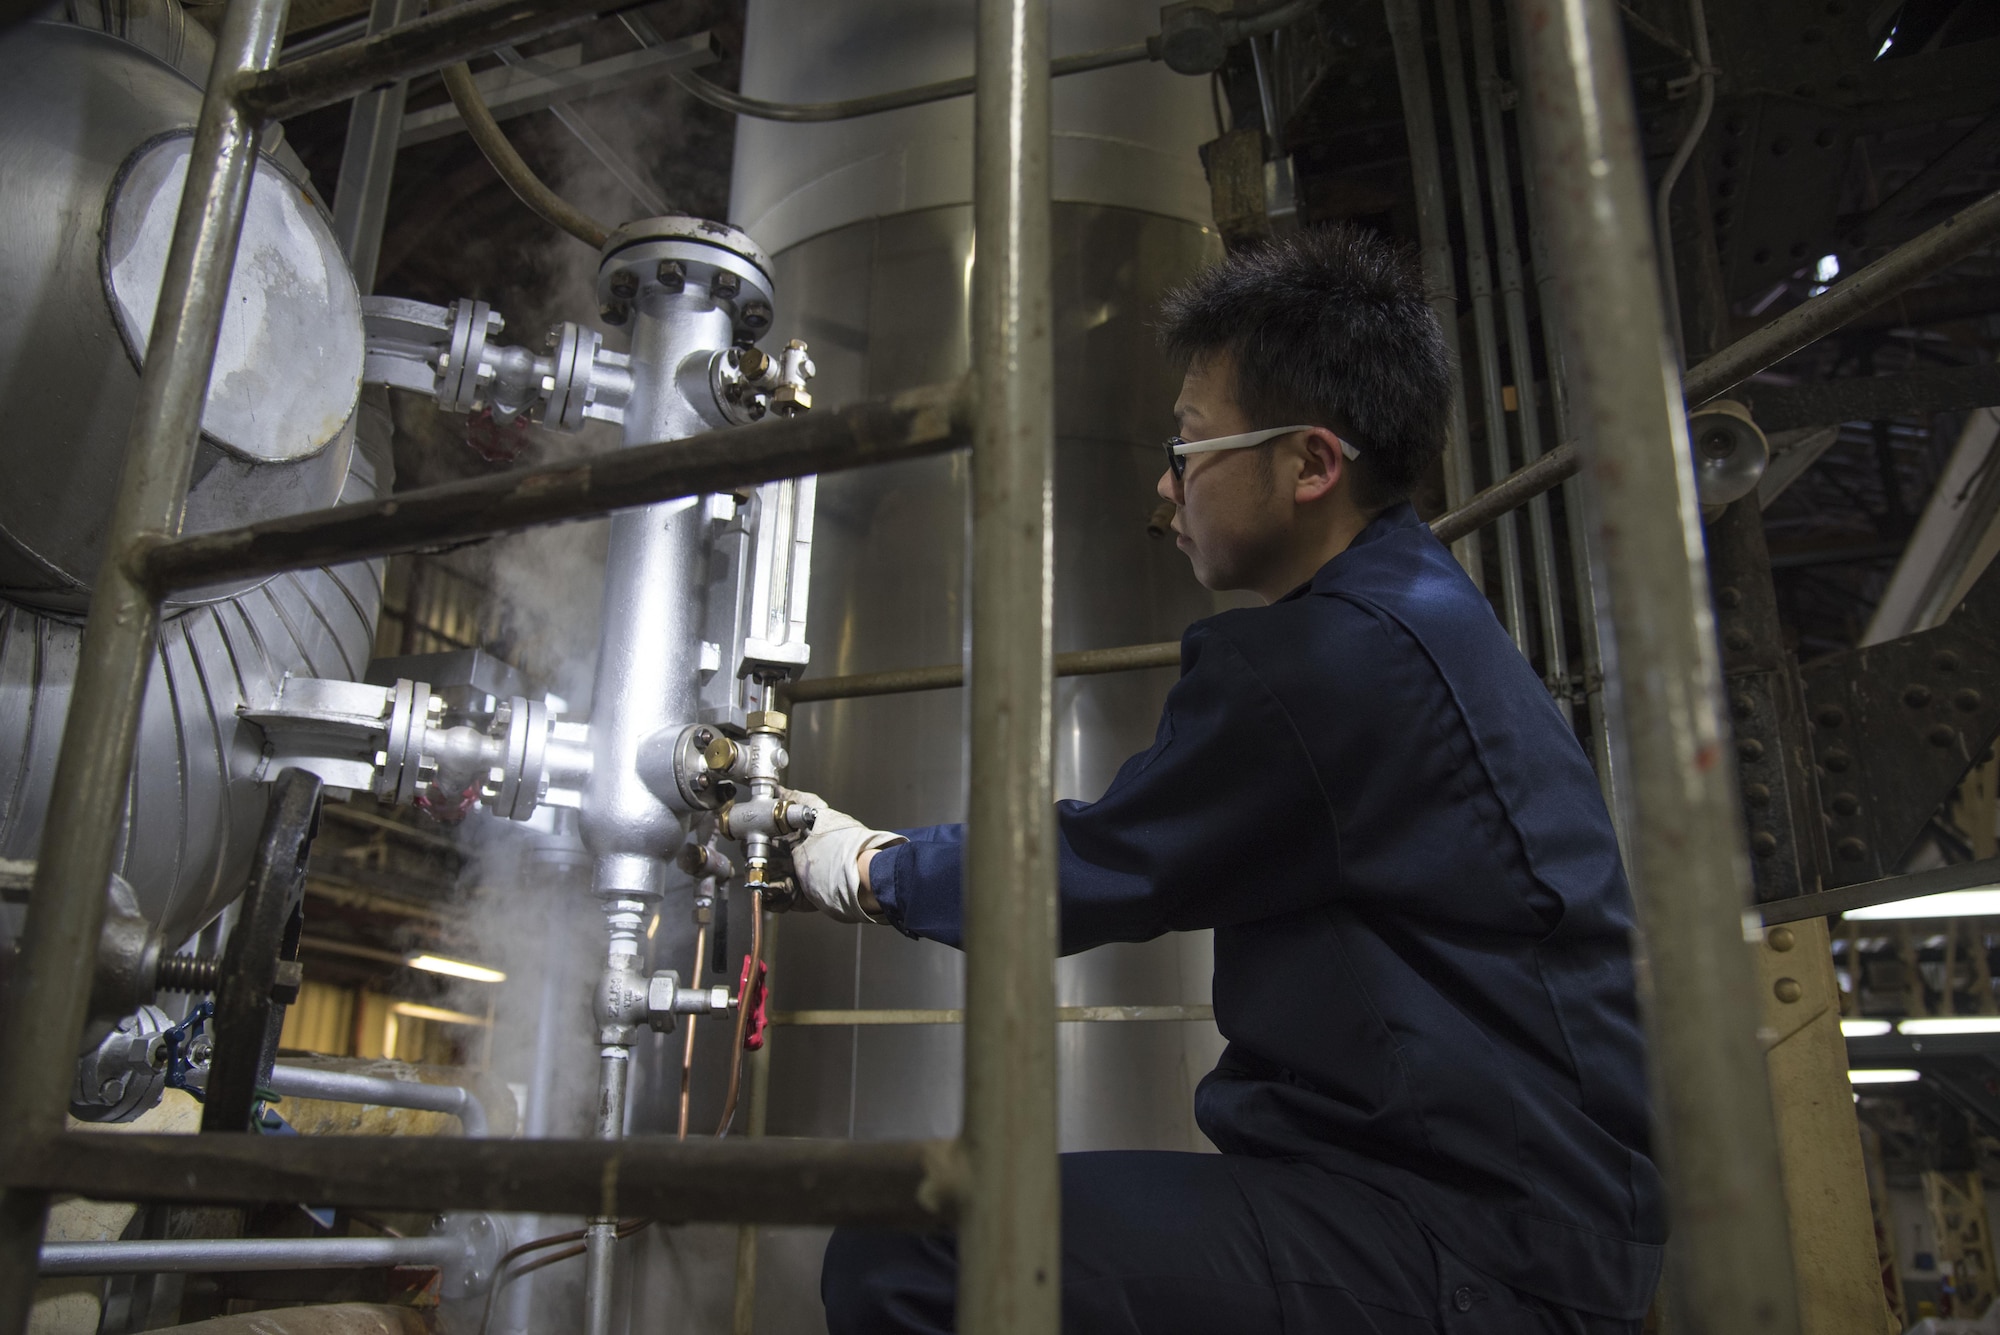 Shingo Matsumura, a 35th Civil Engineer Squadron boiler operator, releases steam from a boiler at Misawa Air Base, Japan, Jan. 30, 2017. As steam comes through a pressure gauge it allows technicians to check the pressure of the instrument, ensuring the conditions are not hazardous. The operators use the inspection for analyzing the cleanliness of the boilers. (U.S. Air Force photo by Airman 1st Class Sadie Colbert)